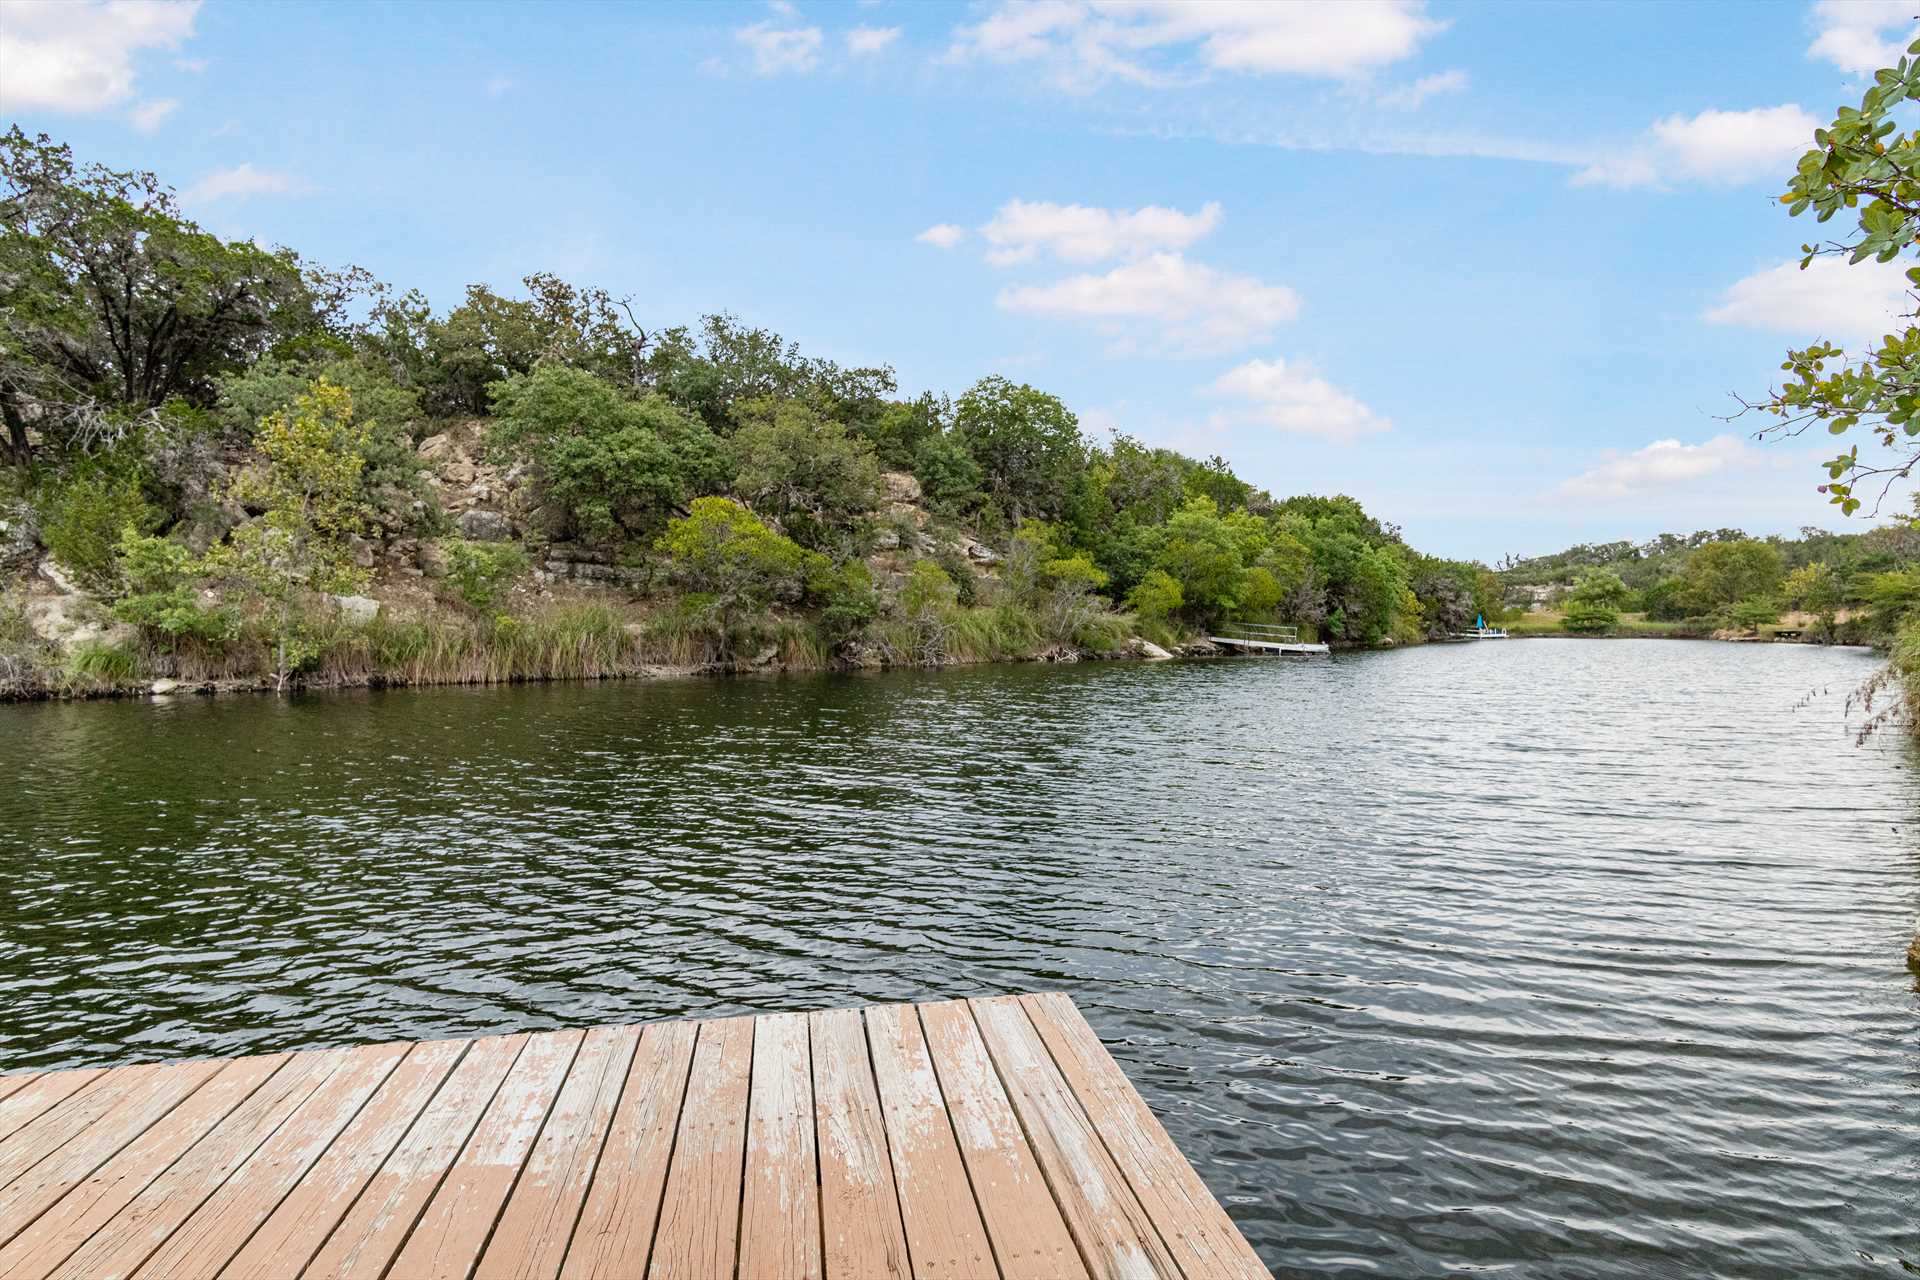                                                 The four acres of Hill Country beauty you have to explore include private access to the creek, a great way to beat the Texas heat!